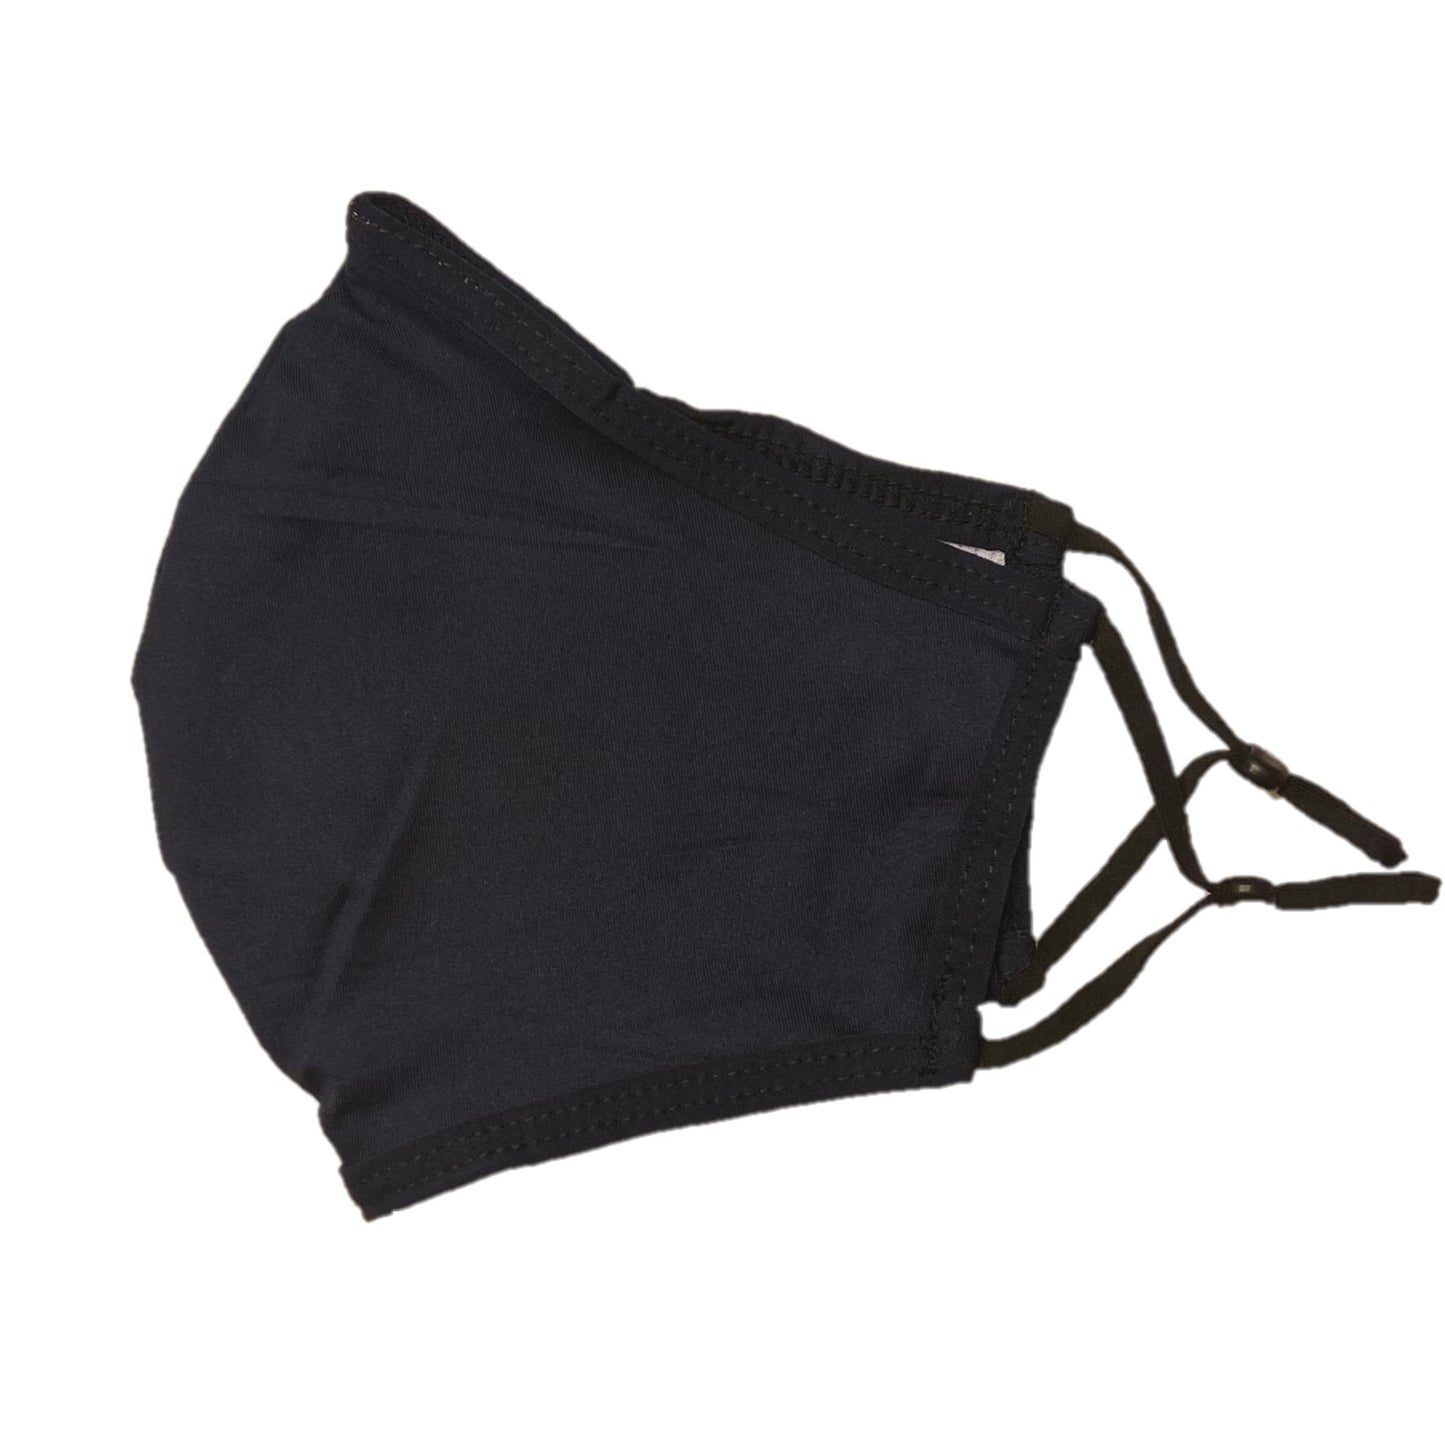 face mask with antibacterial lining and adjustable straps